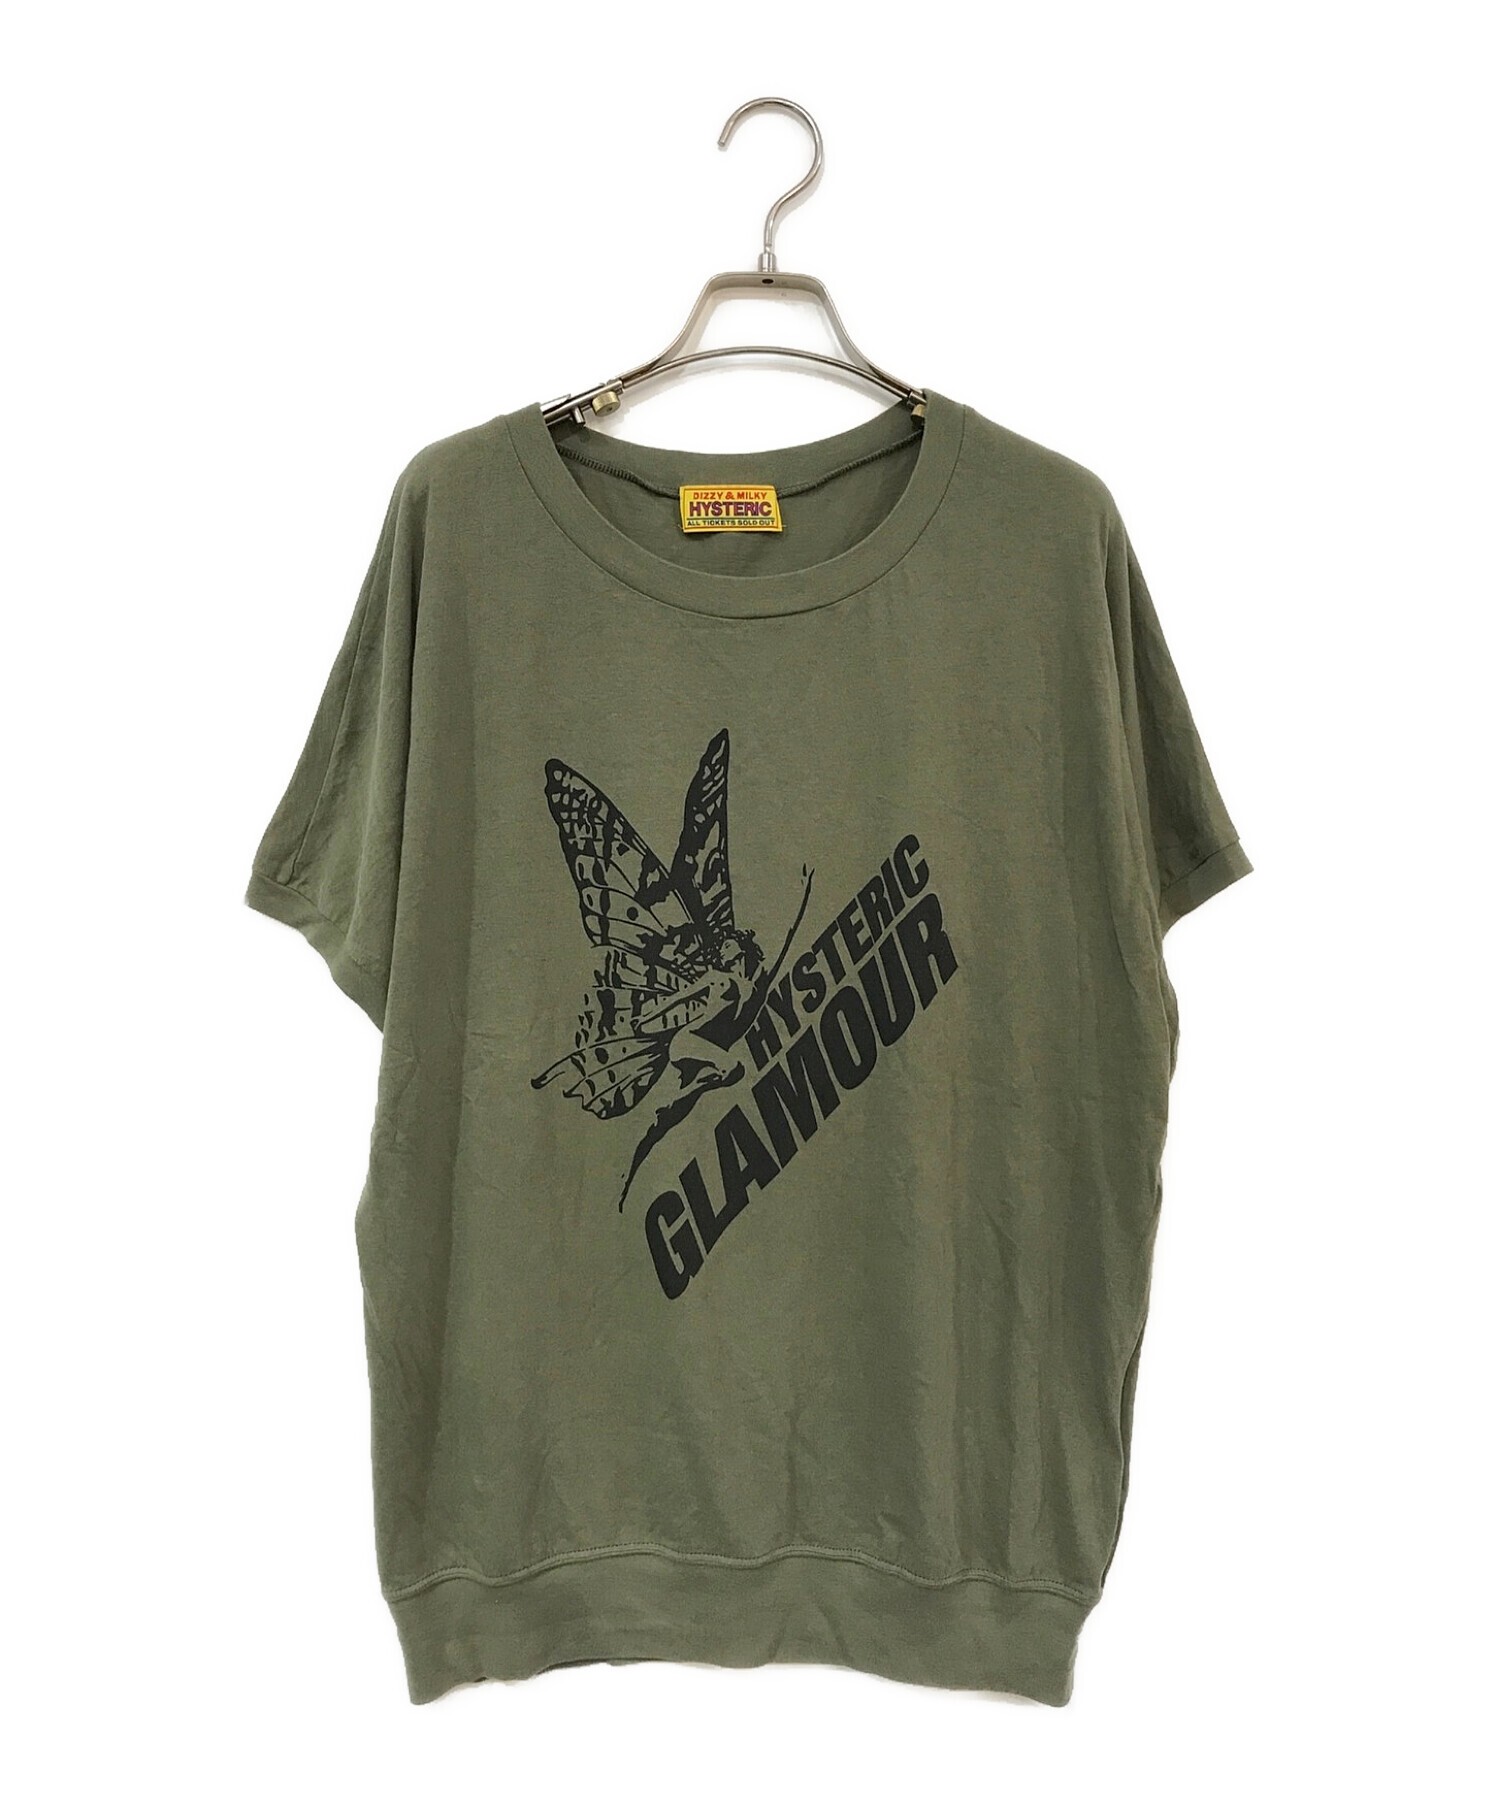 Hysteric Glamour (ヒステリックグラマー) BUTTERFLY GIRL プリント Tシャツ カーキ サイズ:ＦＲＥＥ